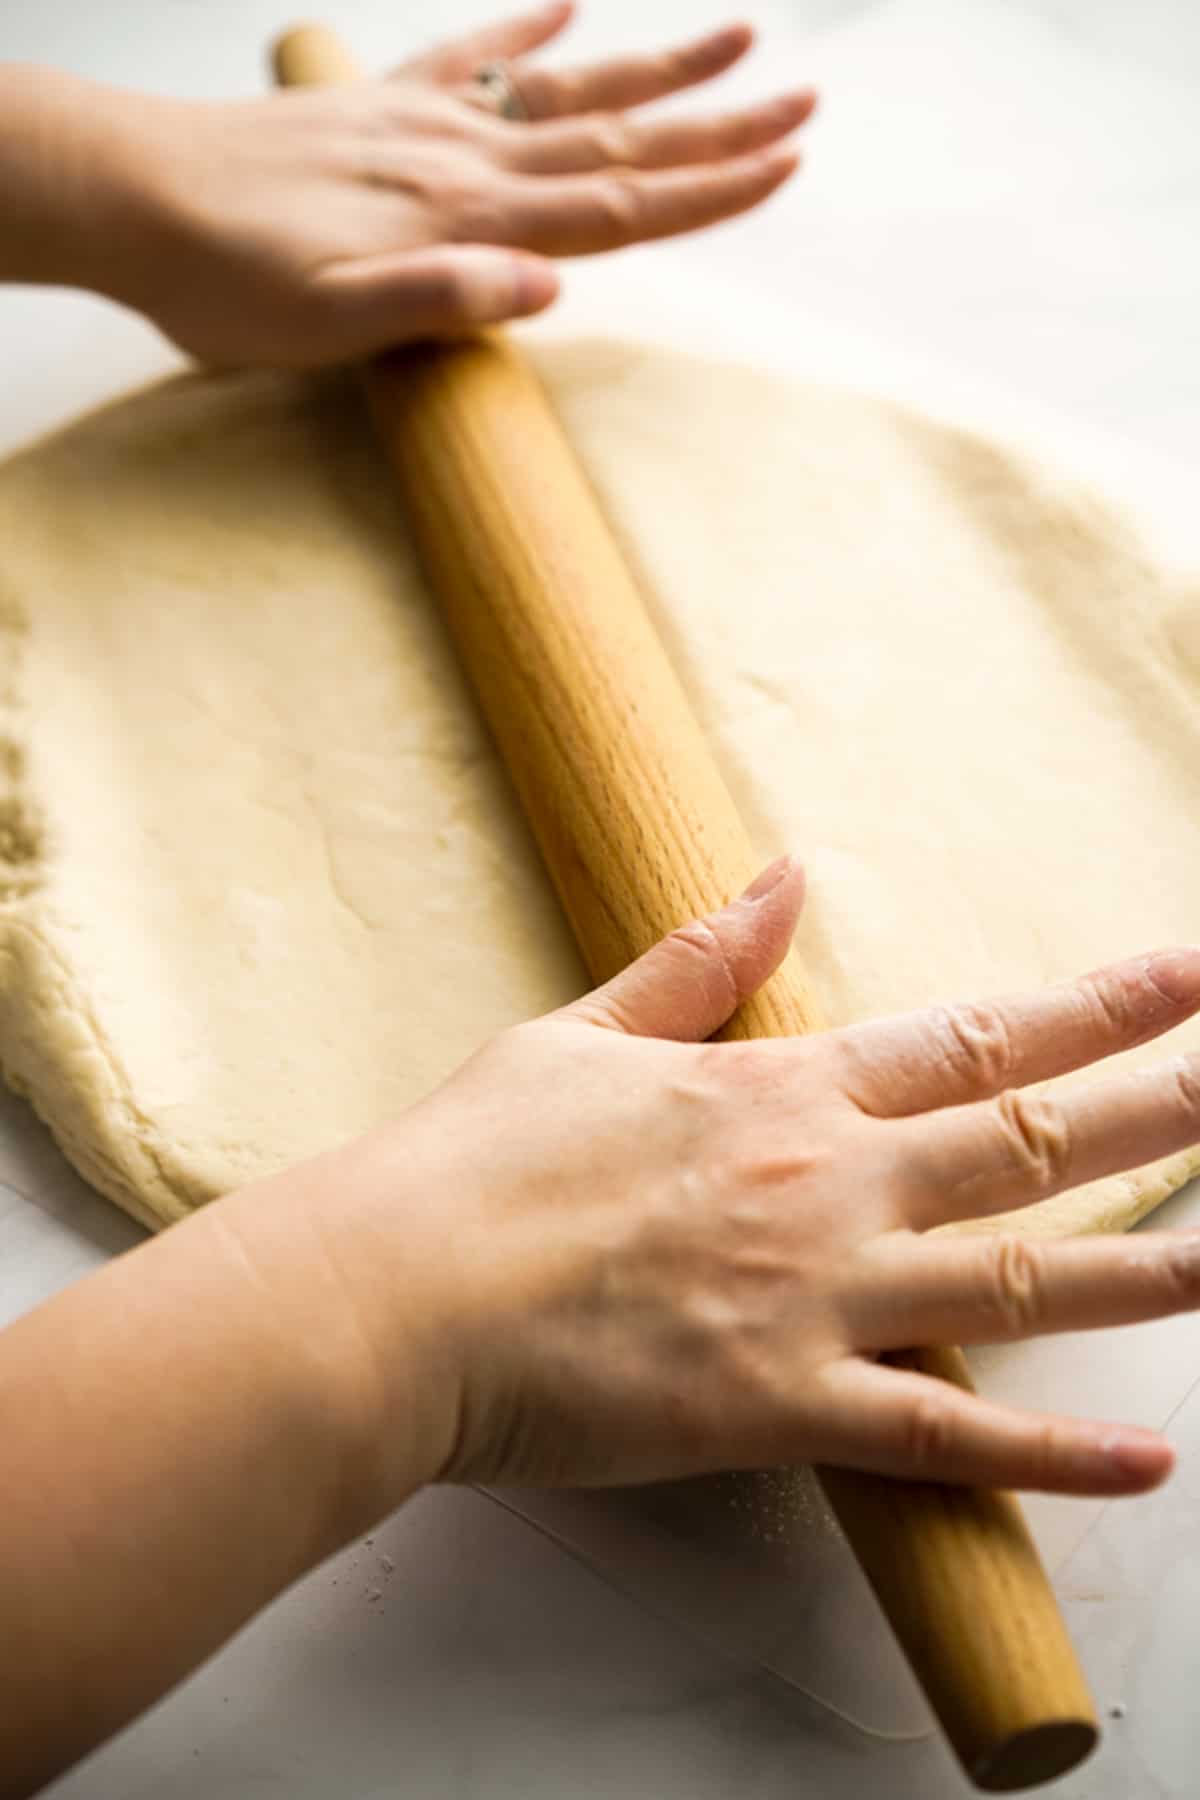 Rolling dough with a rolling pin